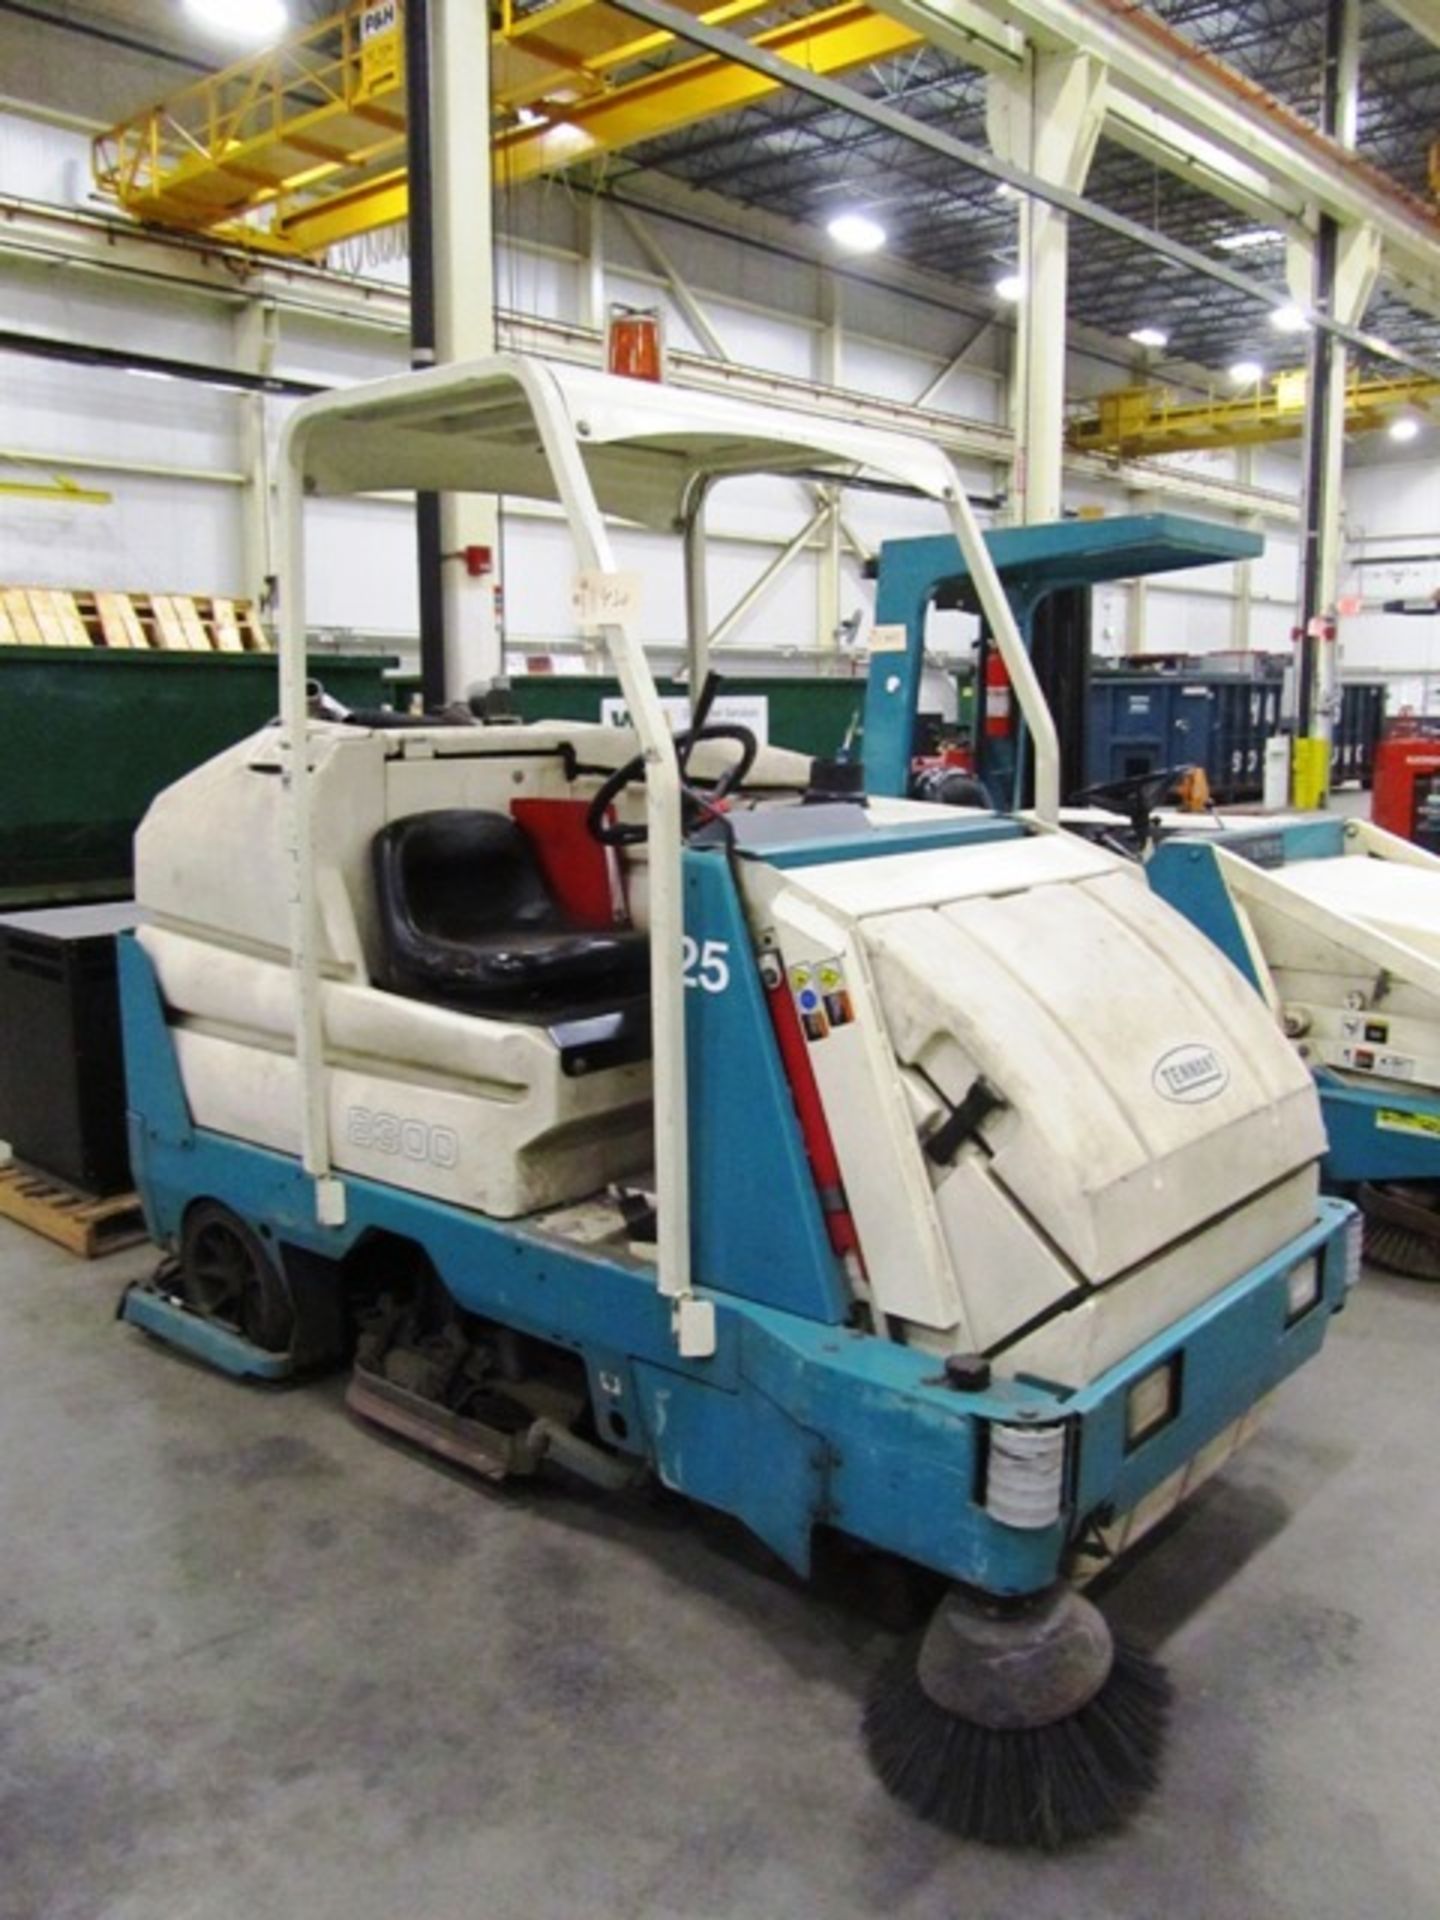 Tennant Model 8300 Sit Down Type Electric Floor Scrubber